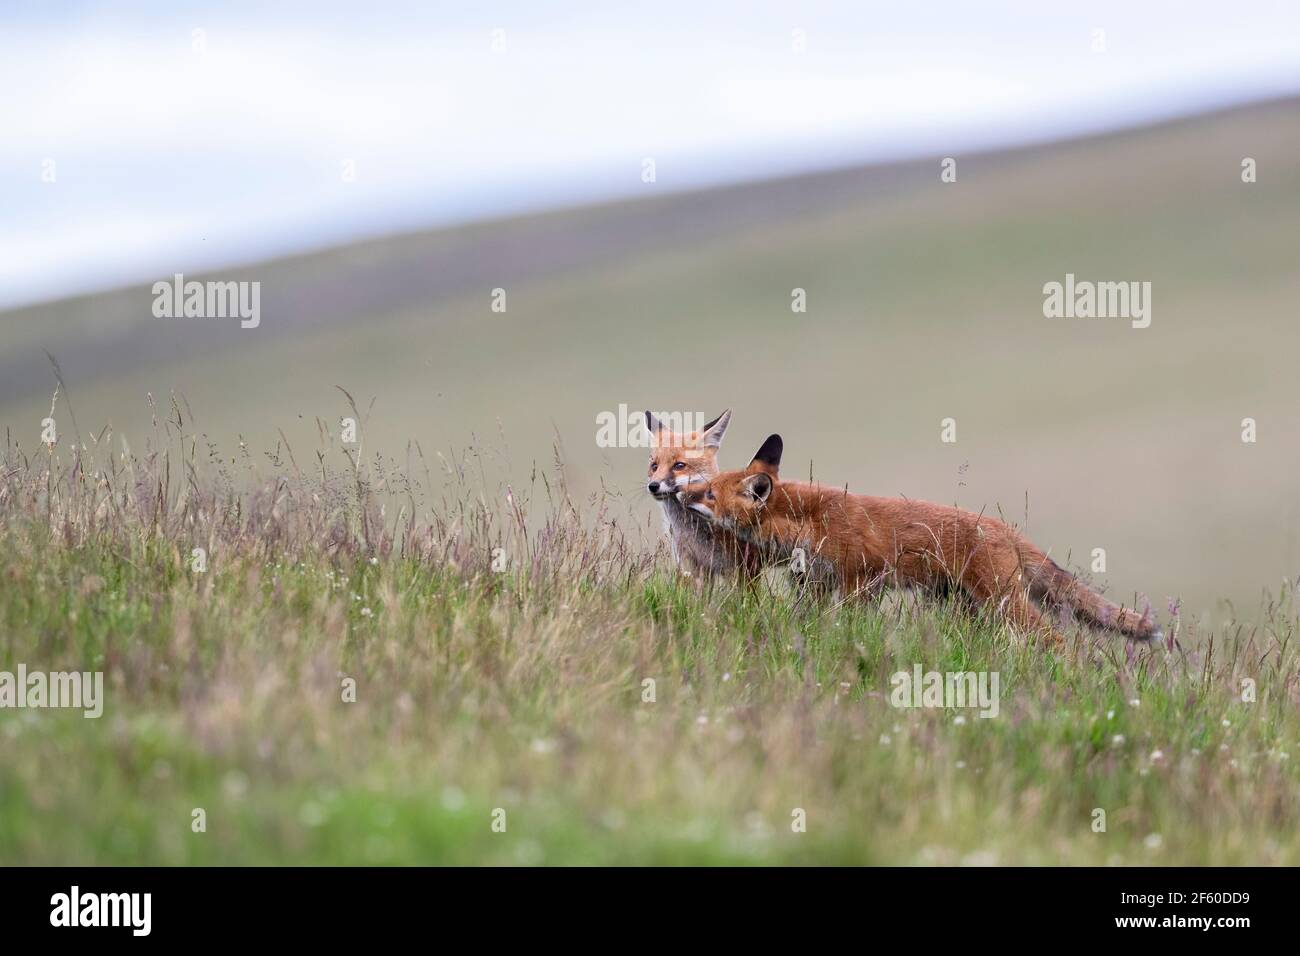 Volpi rosse (Vulpes vulpes), parco nazionale Northumberland, Regno Unito, Foto Stock